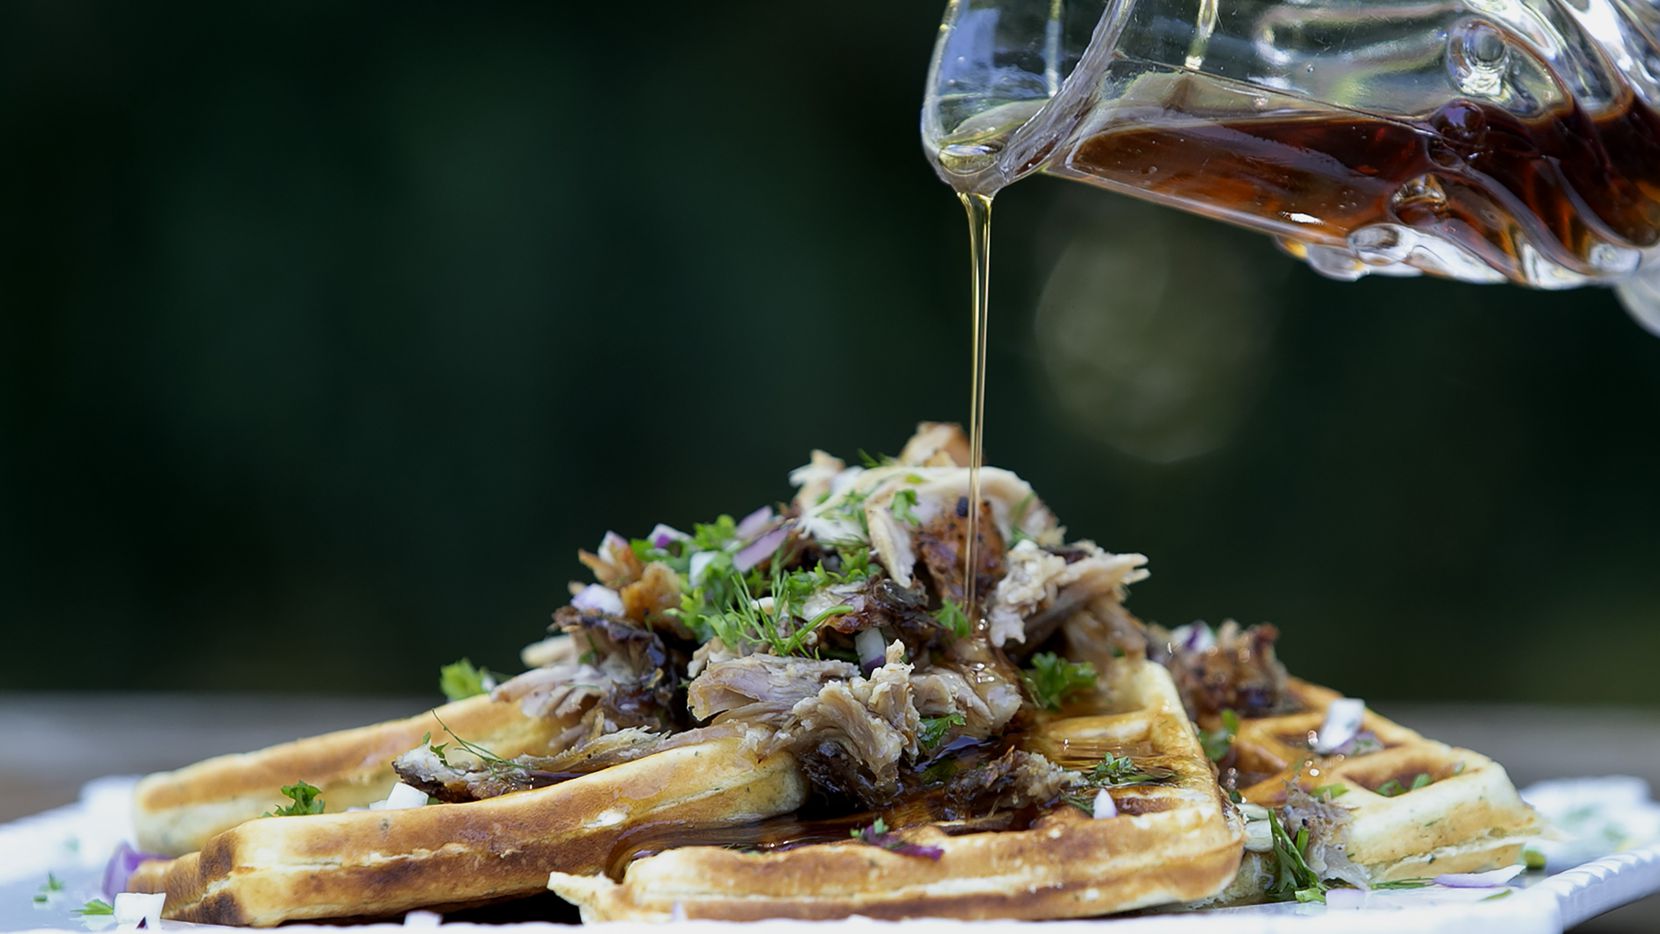 Ranched Waffles With Pulled Pork and Bourbon Maple Syrup (Stewart F. House/Special Contributor)